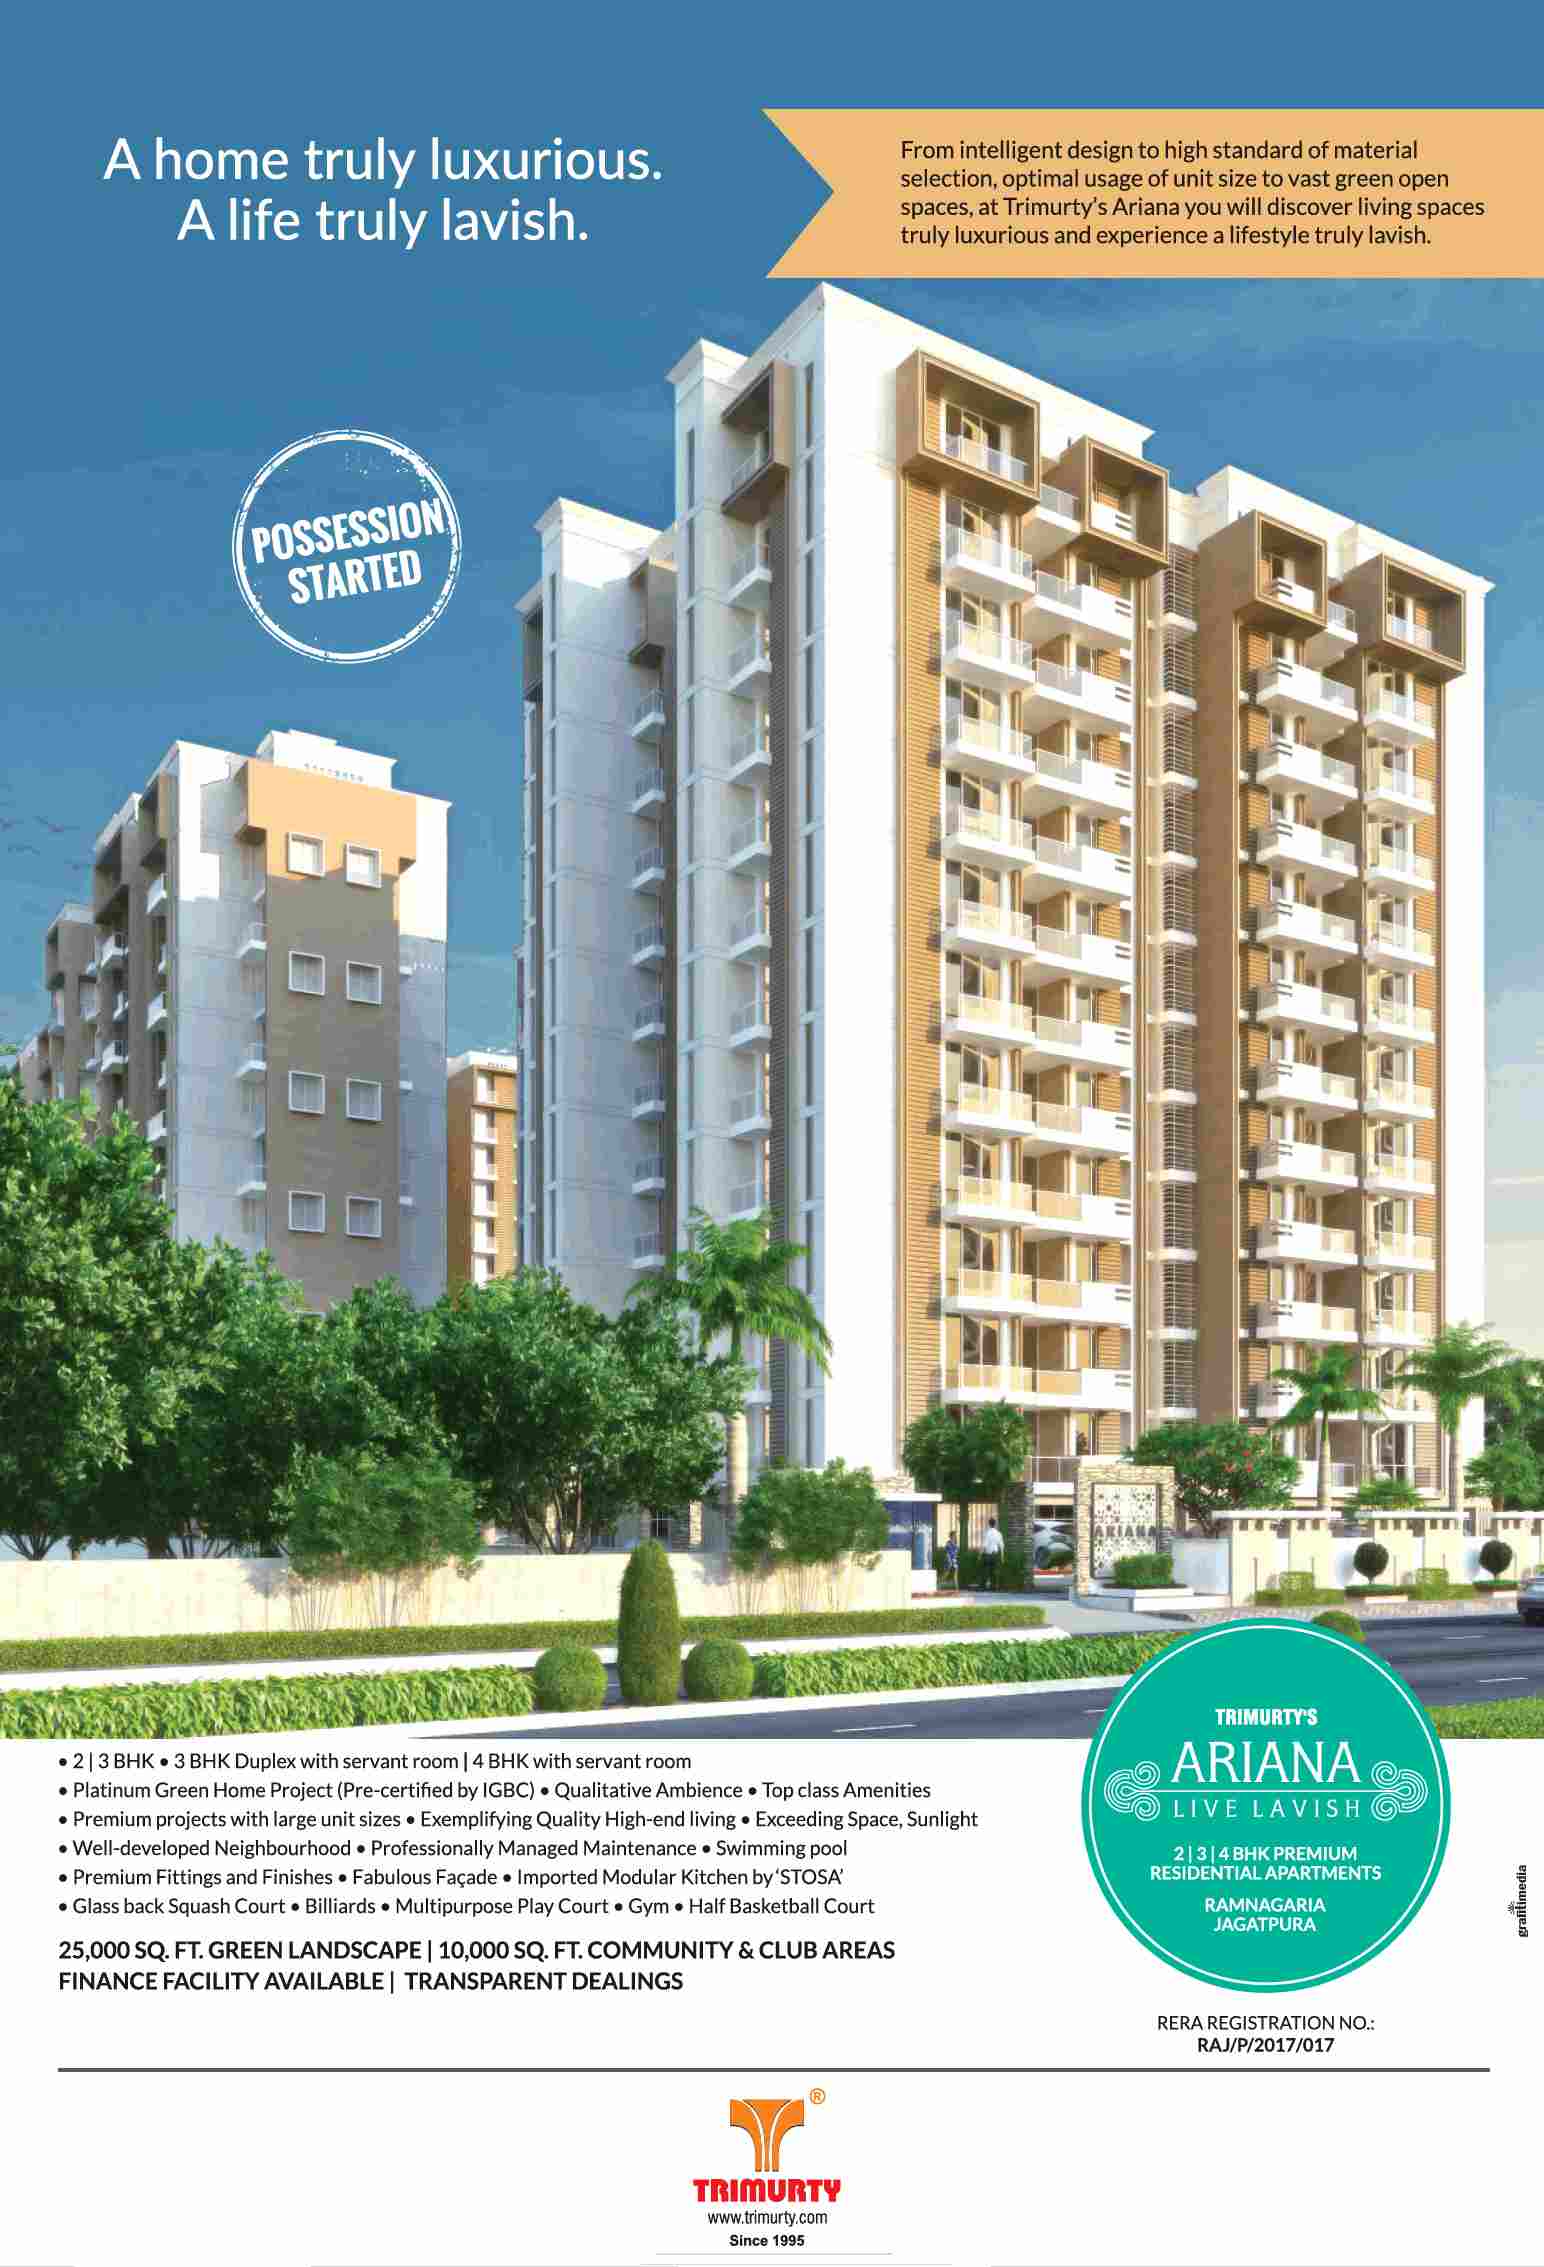 Live a truly luxurious and lavish life at Trimurty Ariana in Jaipur